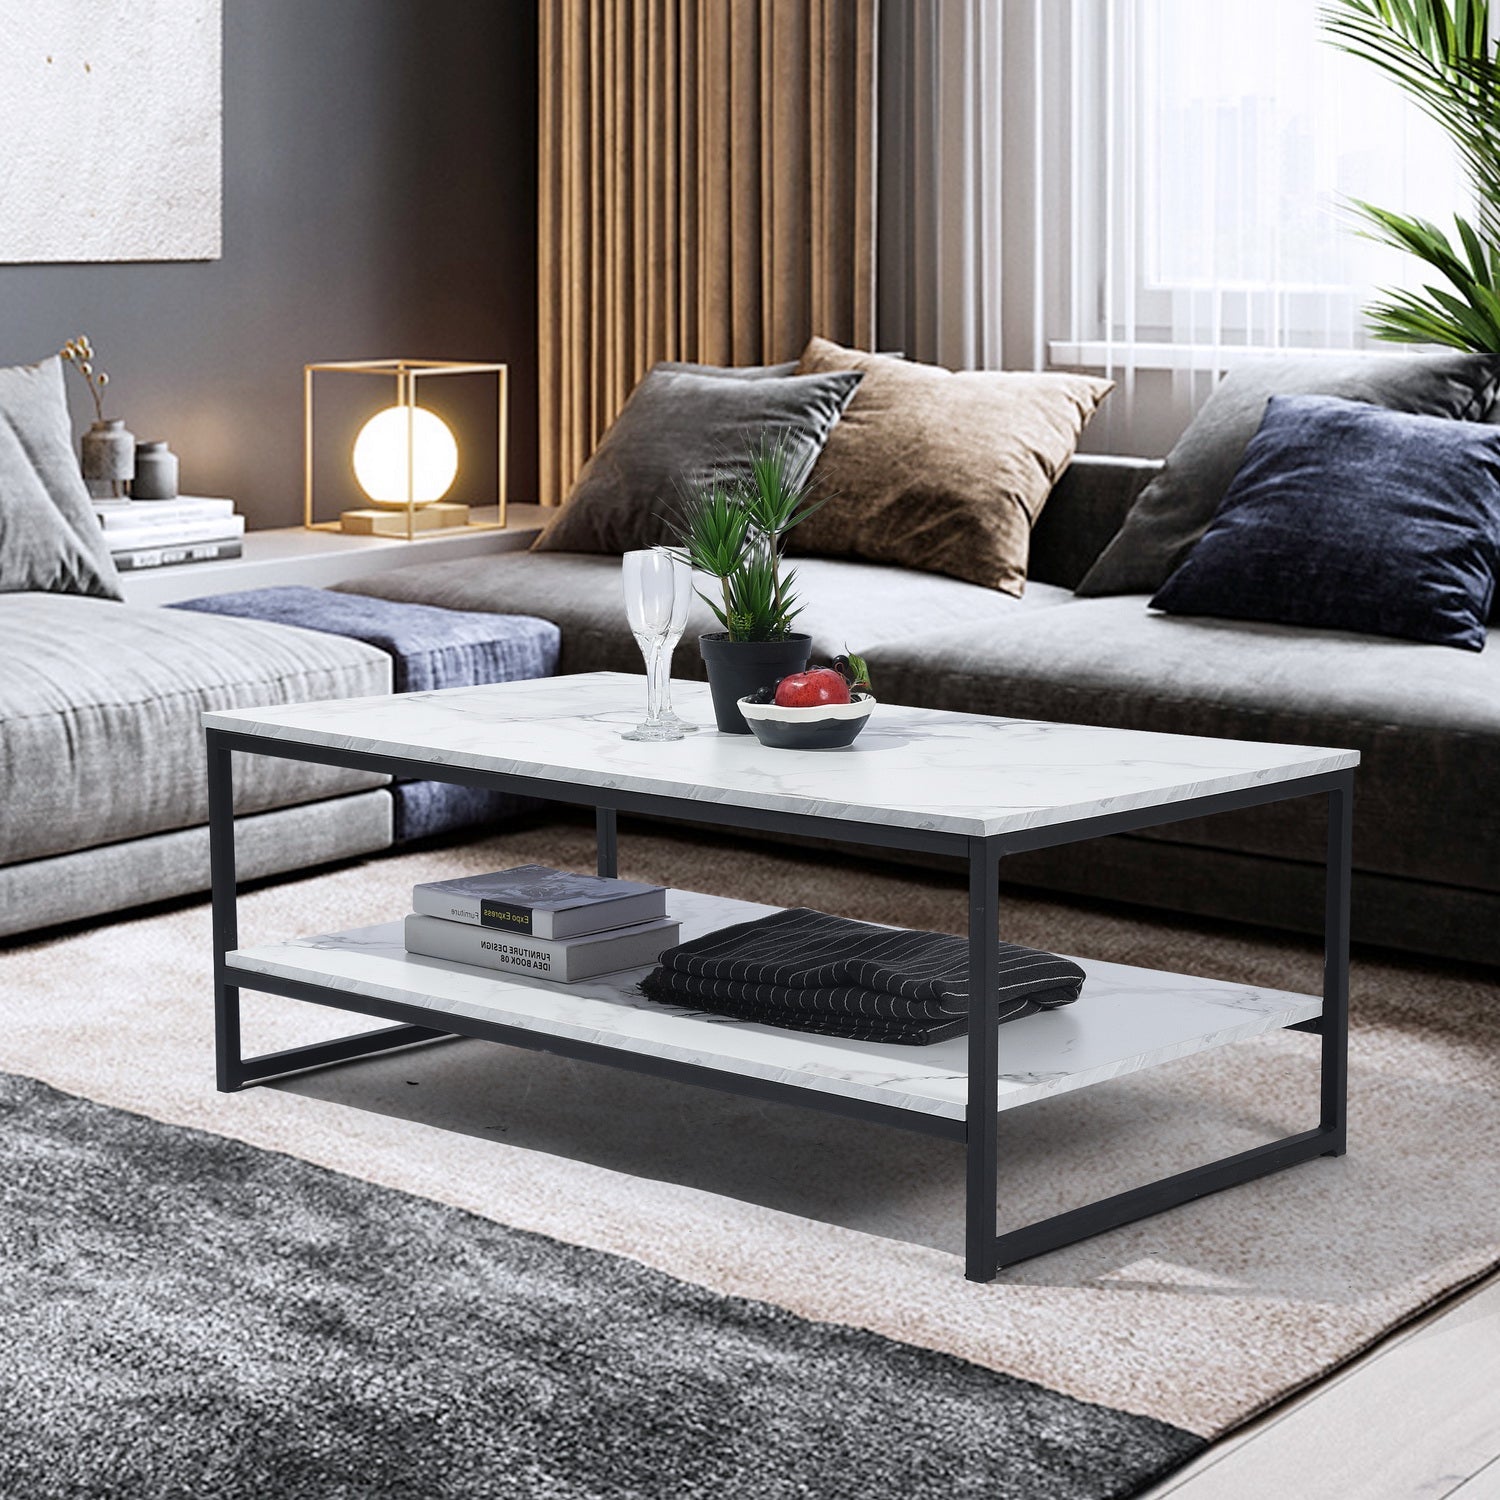 Facto 2 Levels Coffee Table